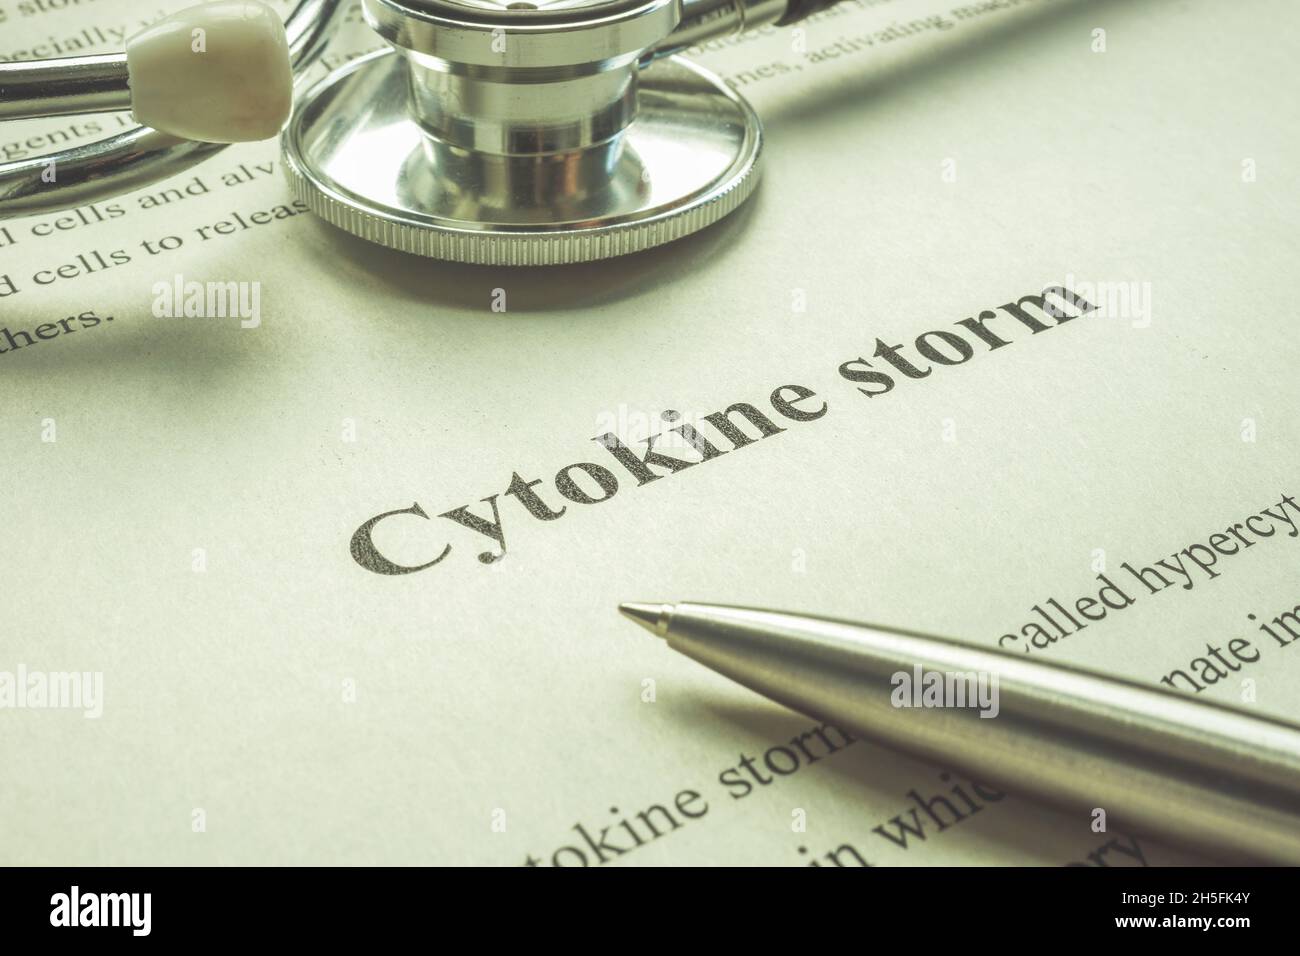 Page about cytokine storm, stethoscope and pen. Stock Photo